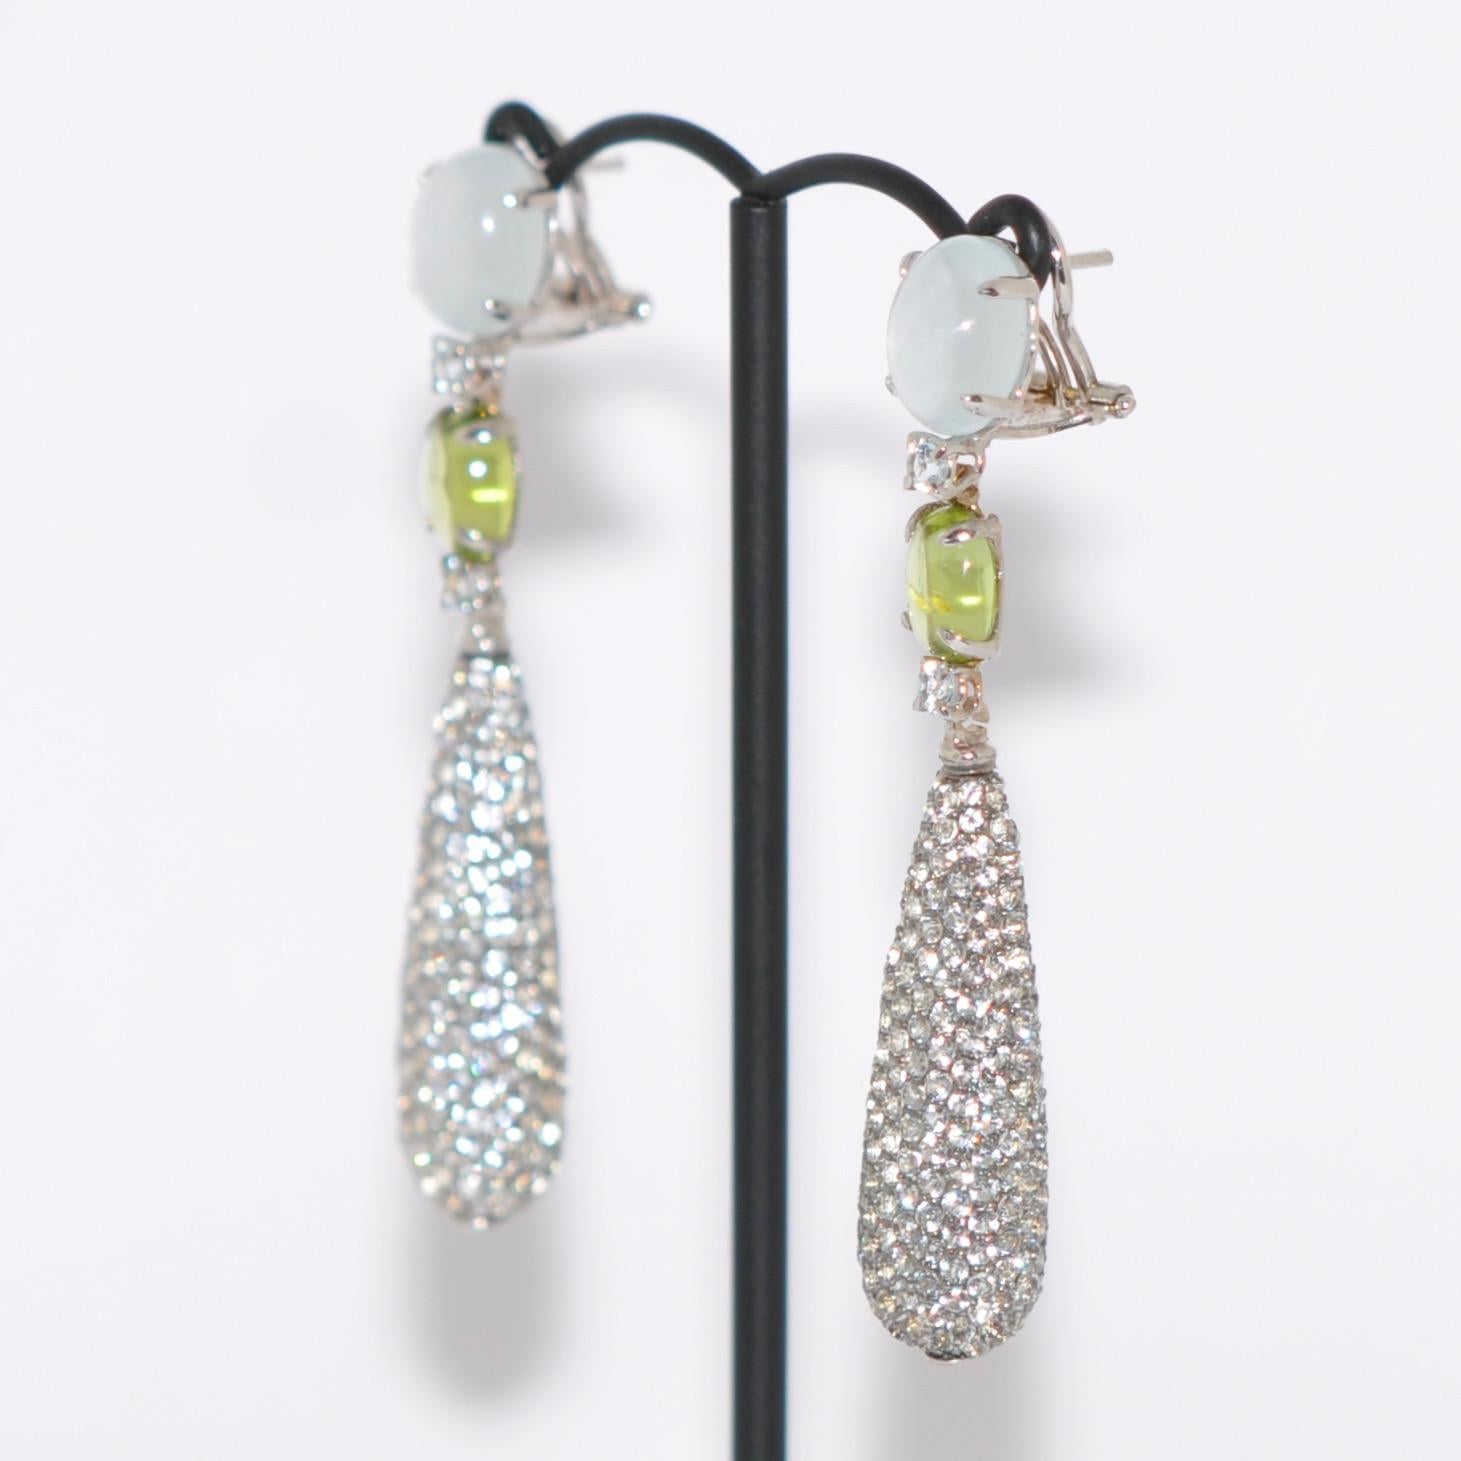 Discover this Sky Topaz, Peridot and Moonstone on White Gold 18 Karat Chandelier Earrings.
Sky Topaz
Peridot
Moonstone
White Gold 18K
